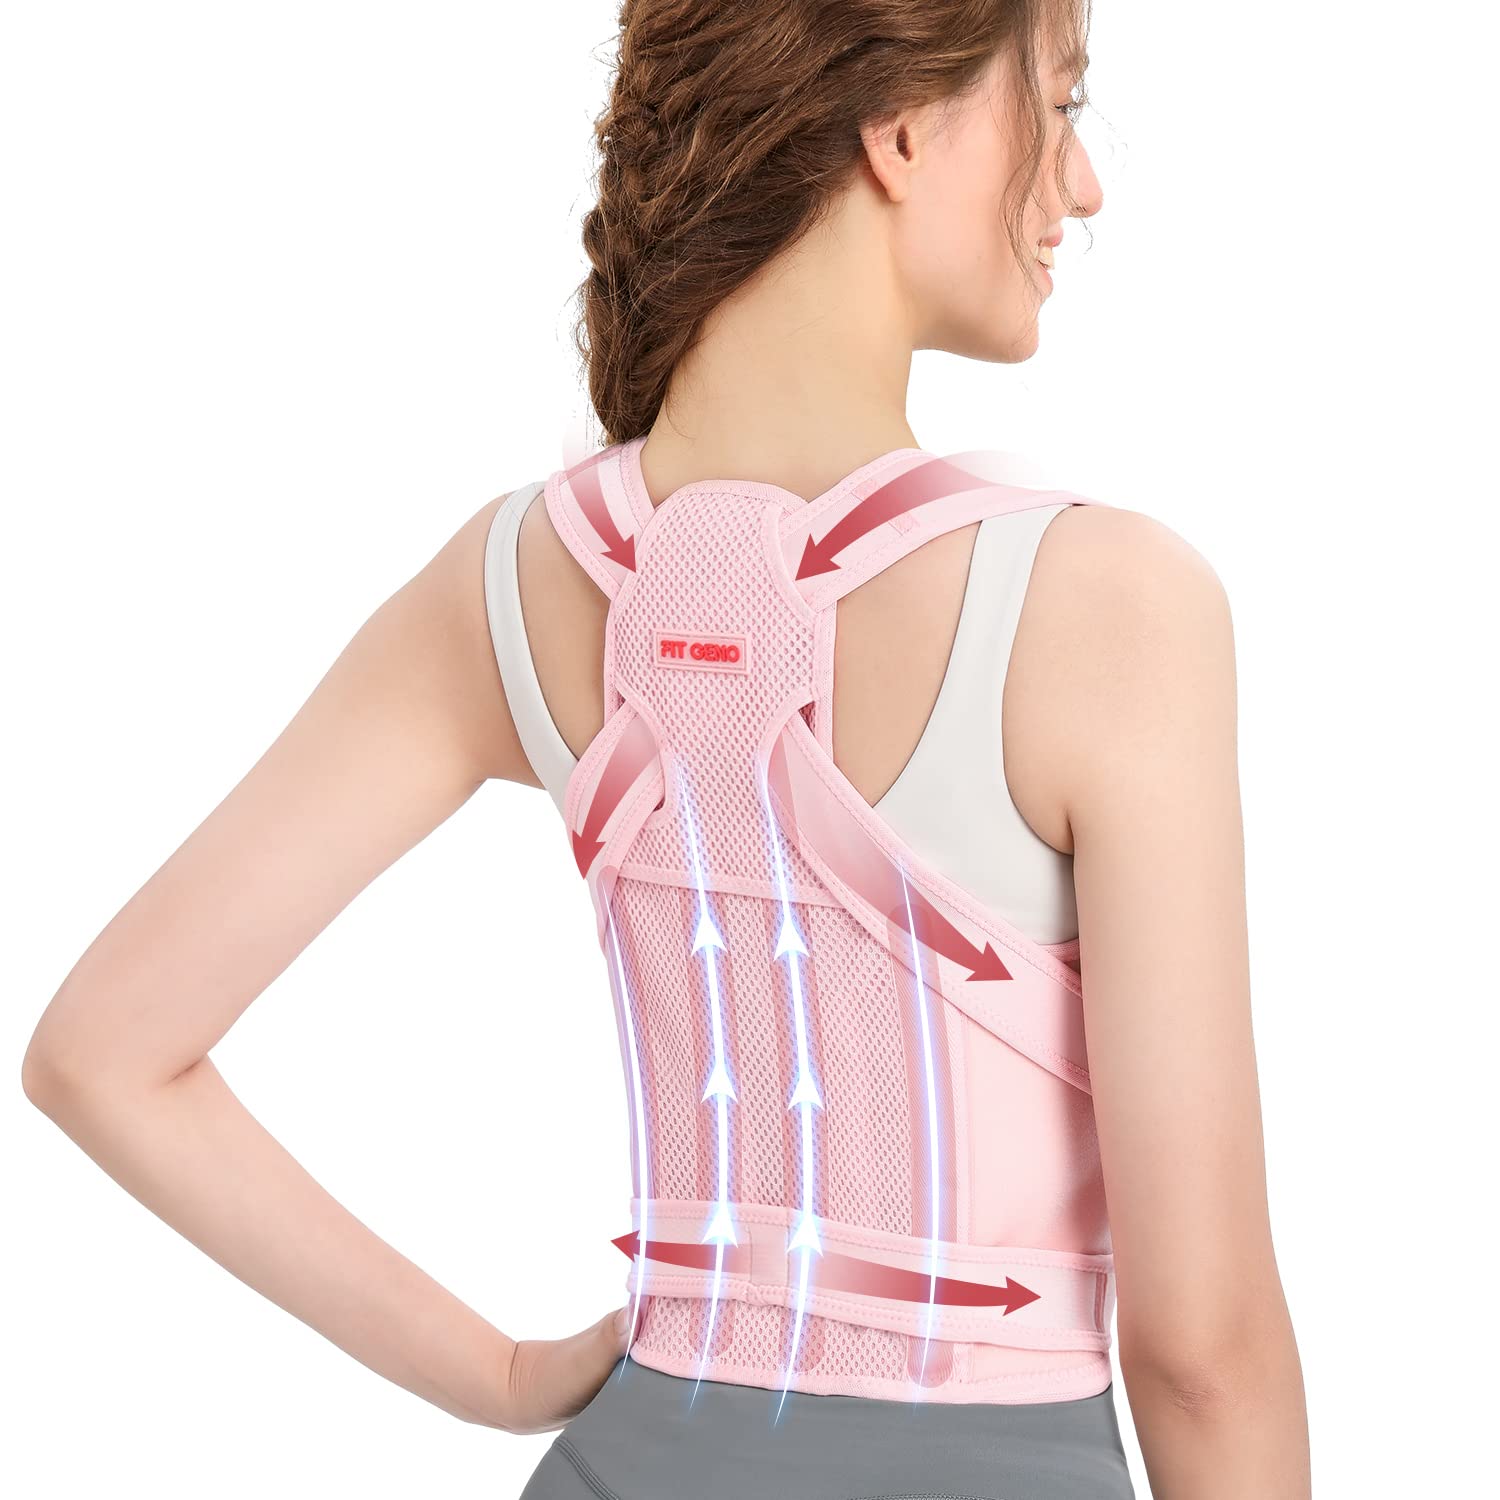 Back Brace and Posture Corrector for Women and Men, Back Straightener Posture  Corrector, Scoliosis and Hunchback Correction, Back Pain, Spine Corrector,  Support, Adjustable Posture Trainer, Pink, Small (Waist 26-34 inch)